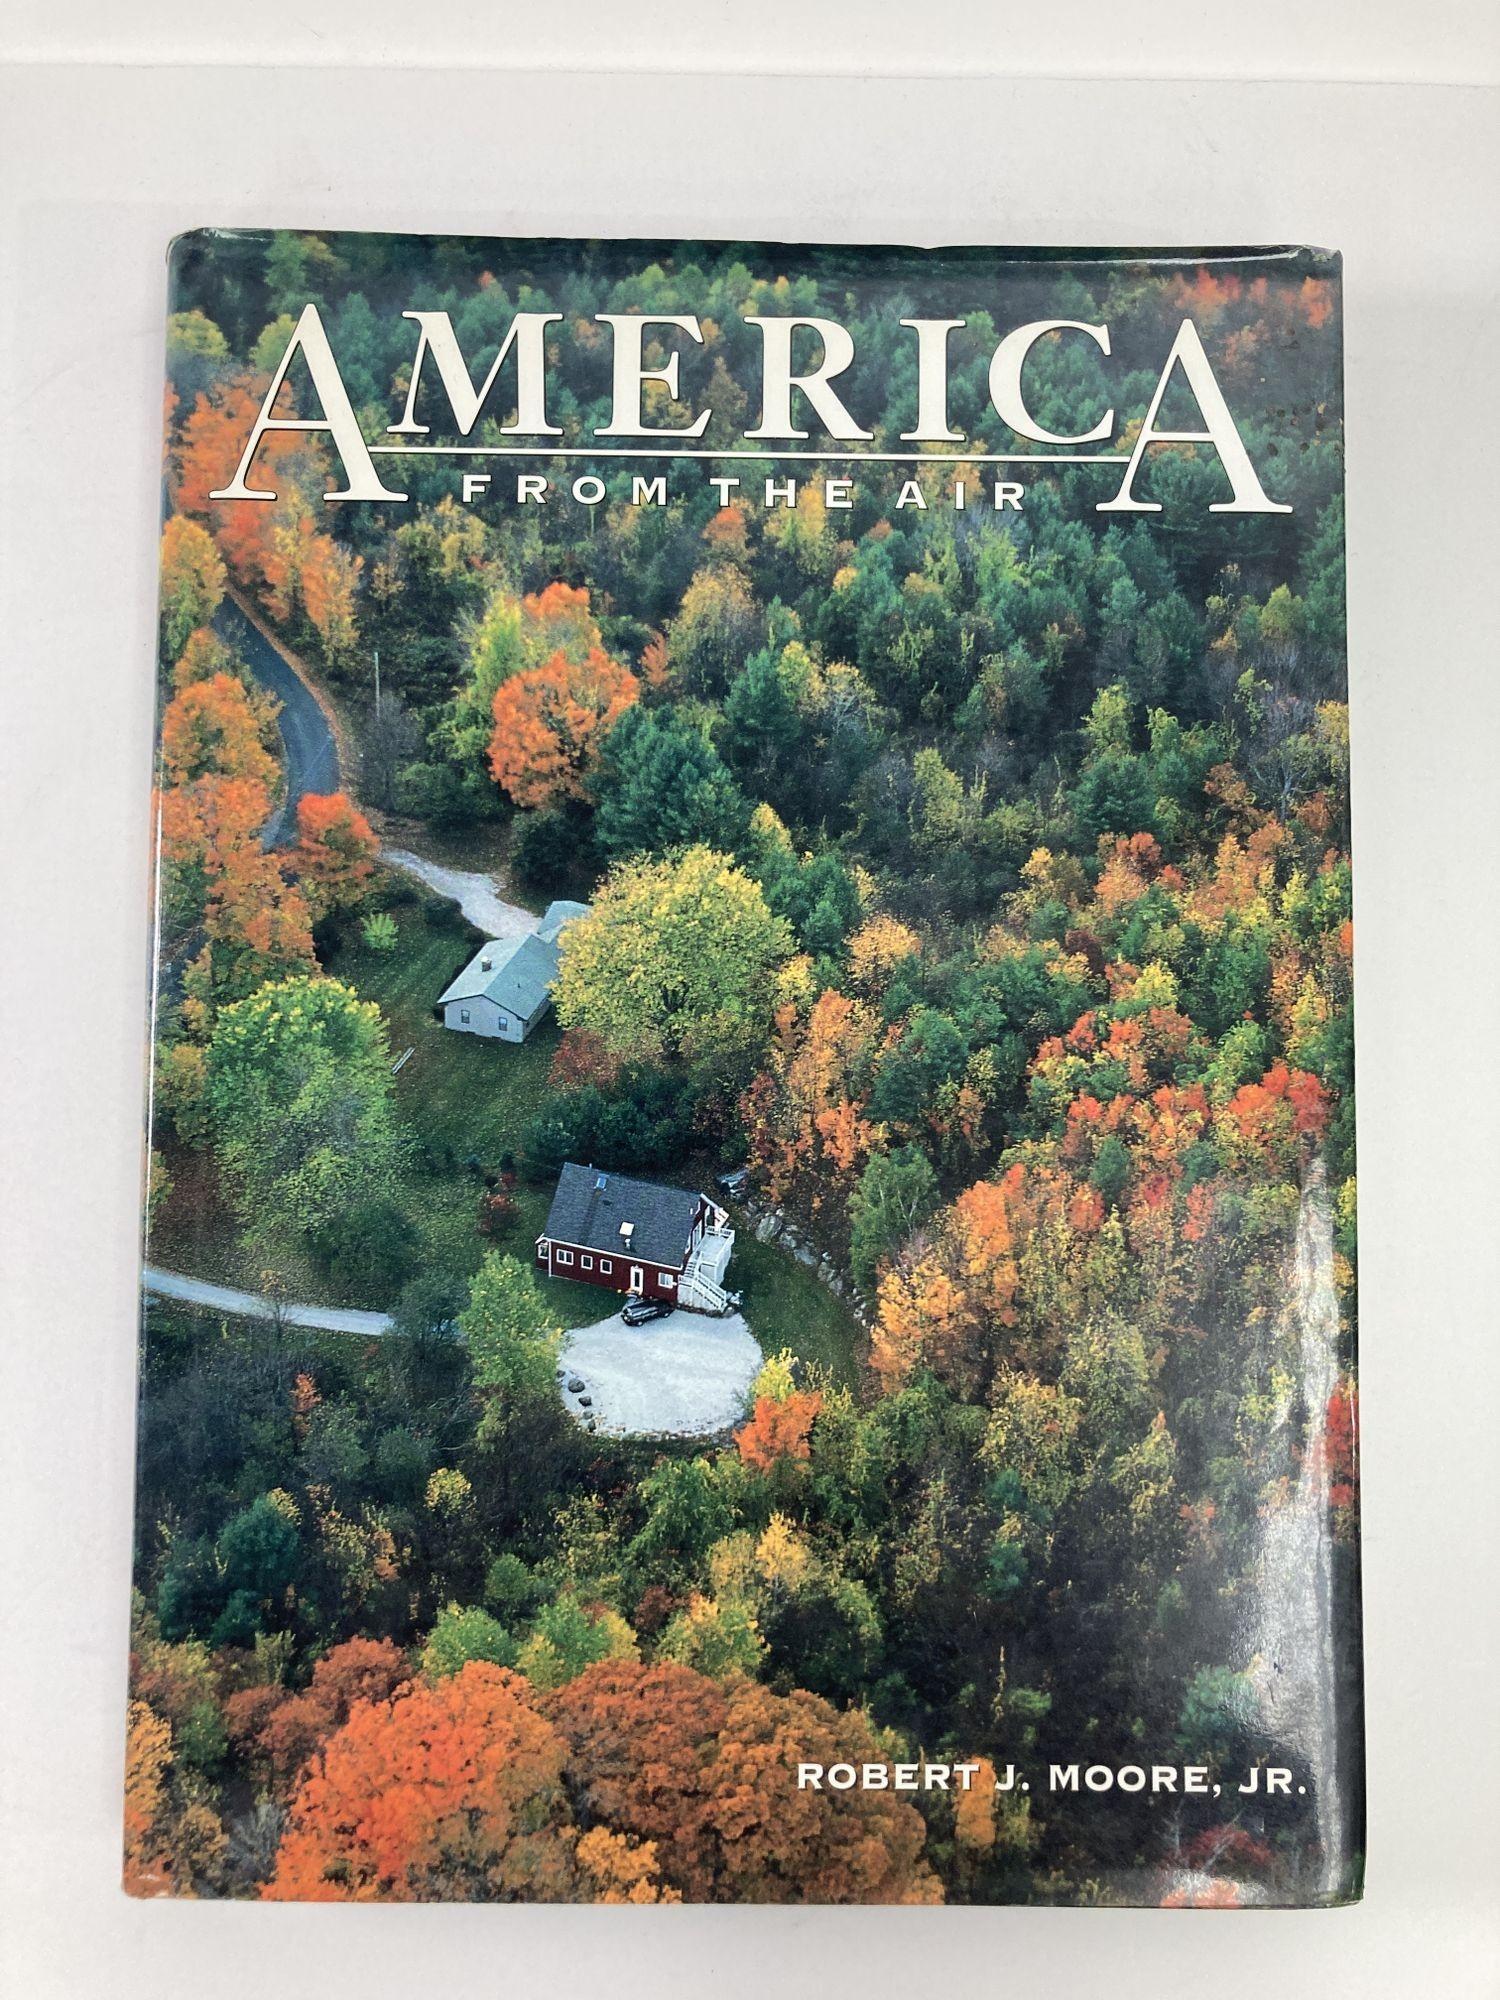 America from the Air by Robert J. Moore Laura Accomazzo Hardcover Book.
See the grandeur and variety of the American landscape from high above. Hundreds of oversized, spectacular photographs create a fascinating virtual tour of the 50 states from a